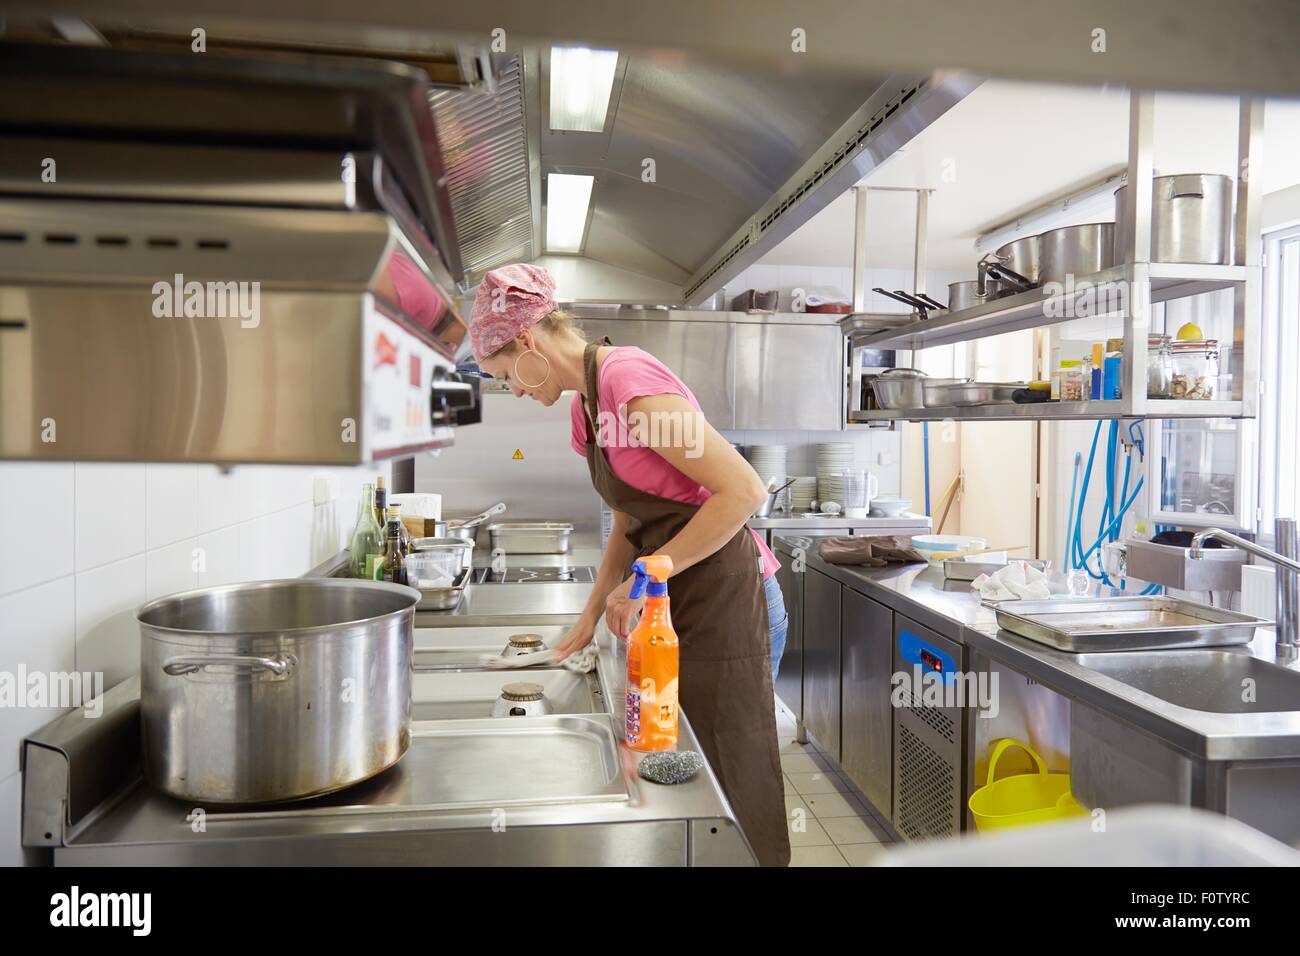 Mature woman wearing apron and headscarf cleaning kitchen hob Stock Photo